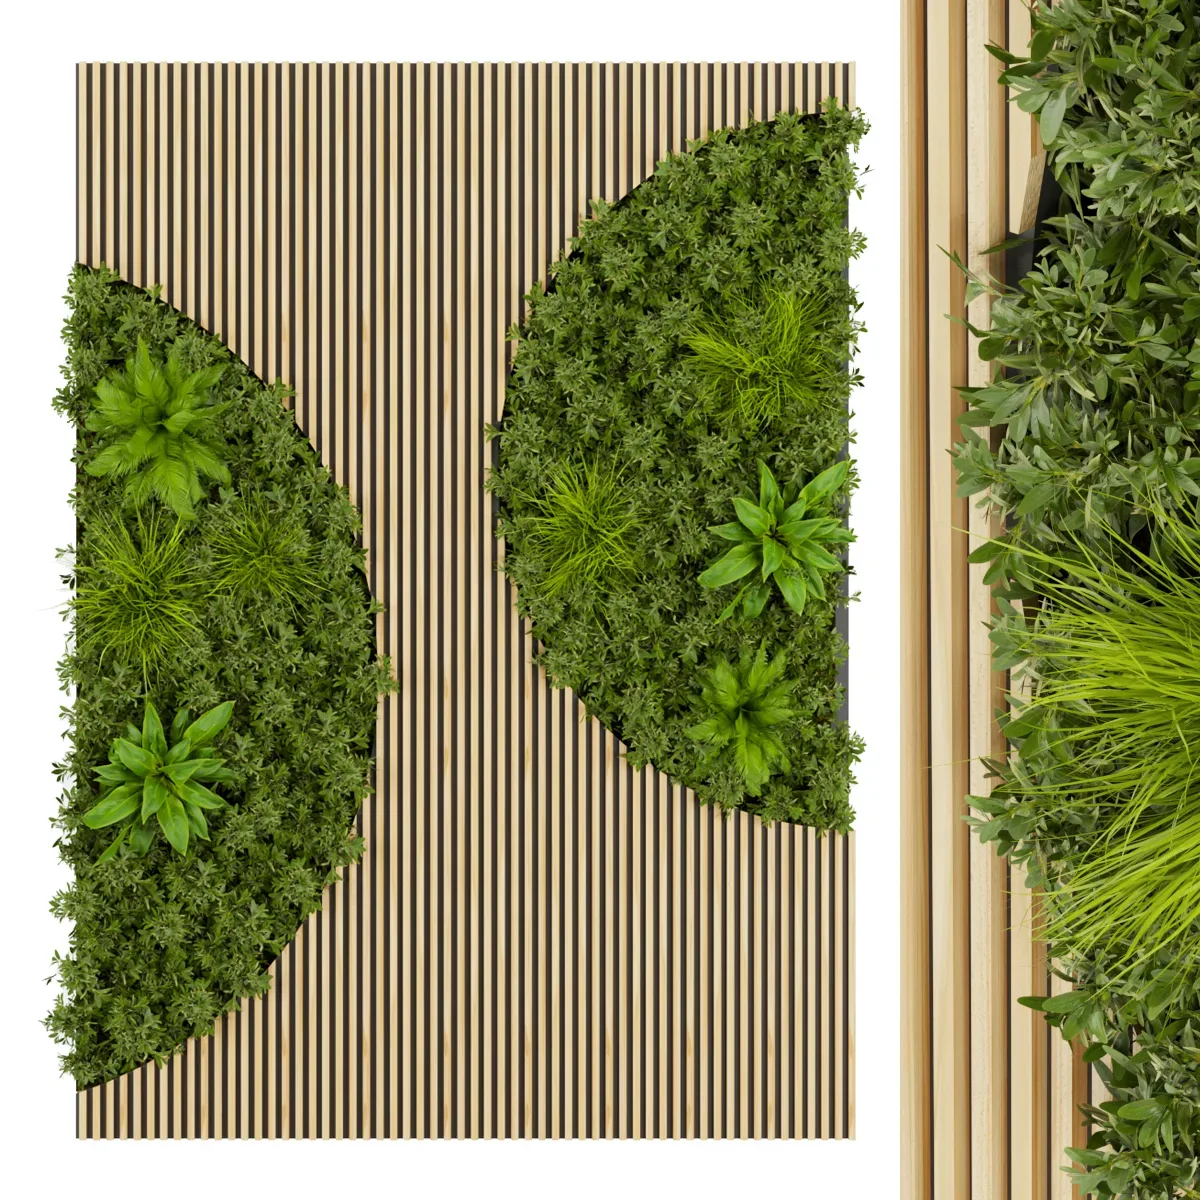 Collection plant vol 331 - fitowall - leaf - blender - 3dmax - cinema 4d